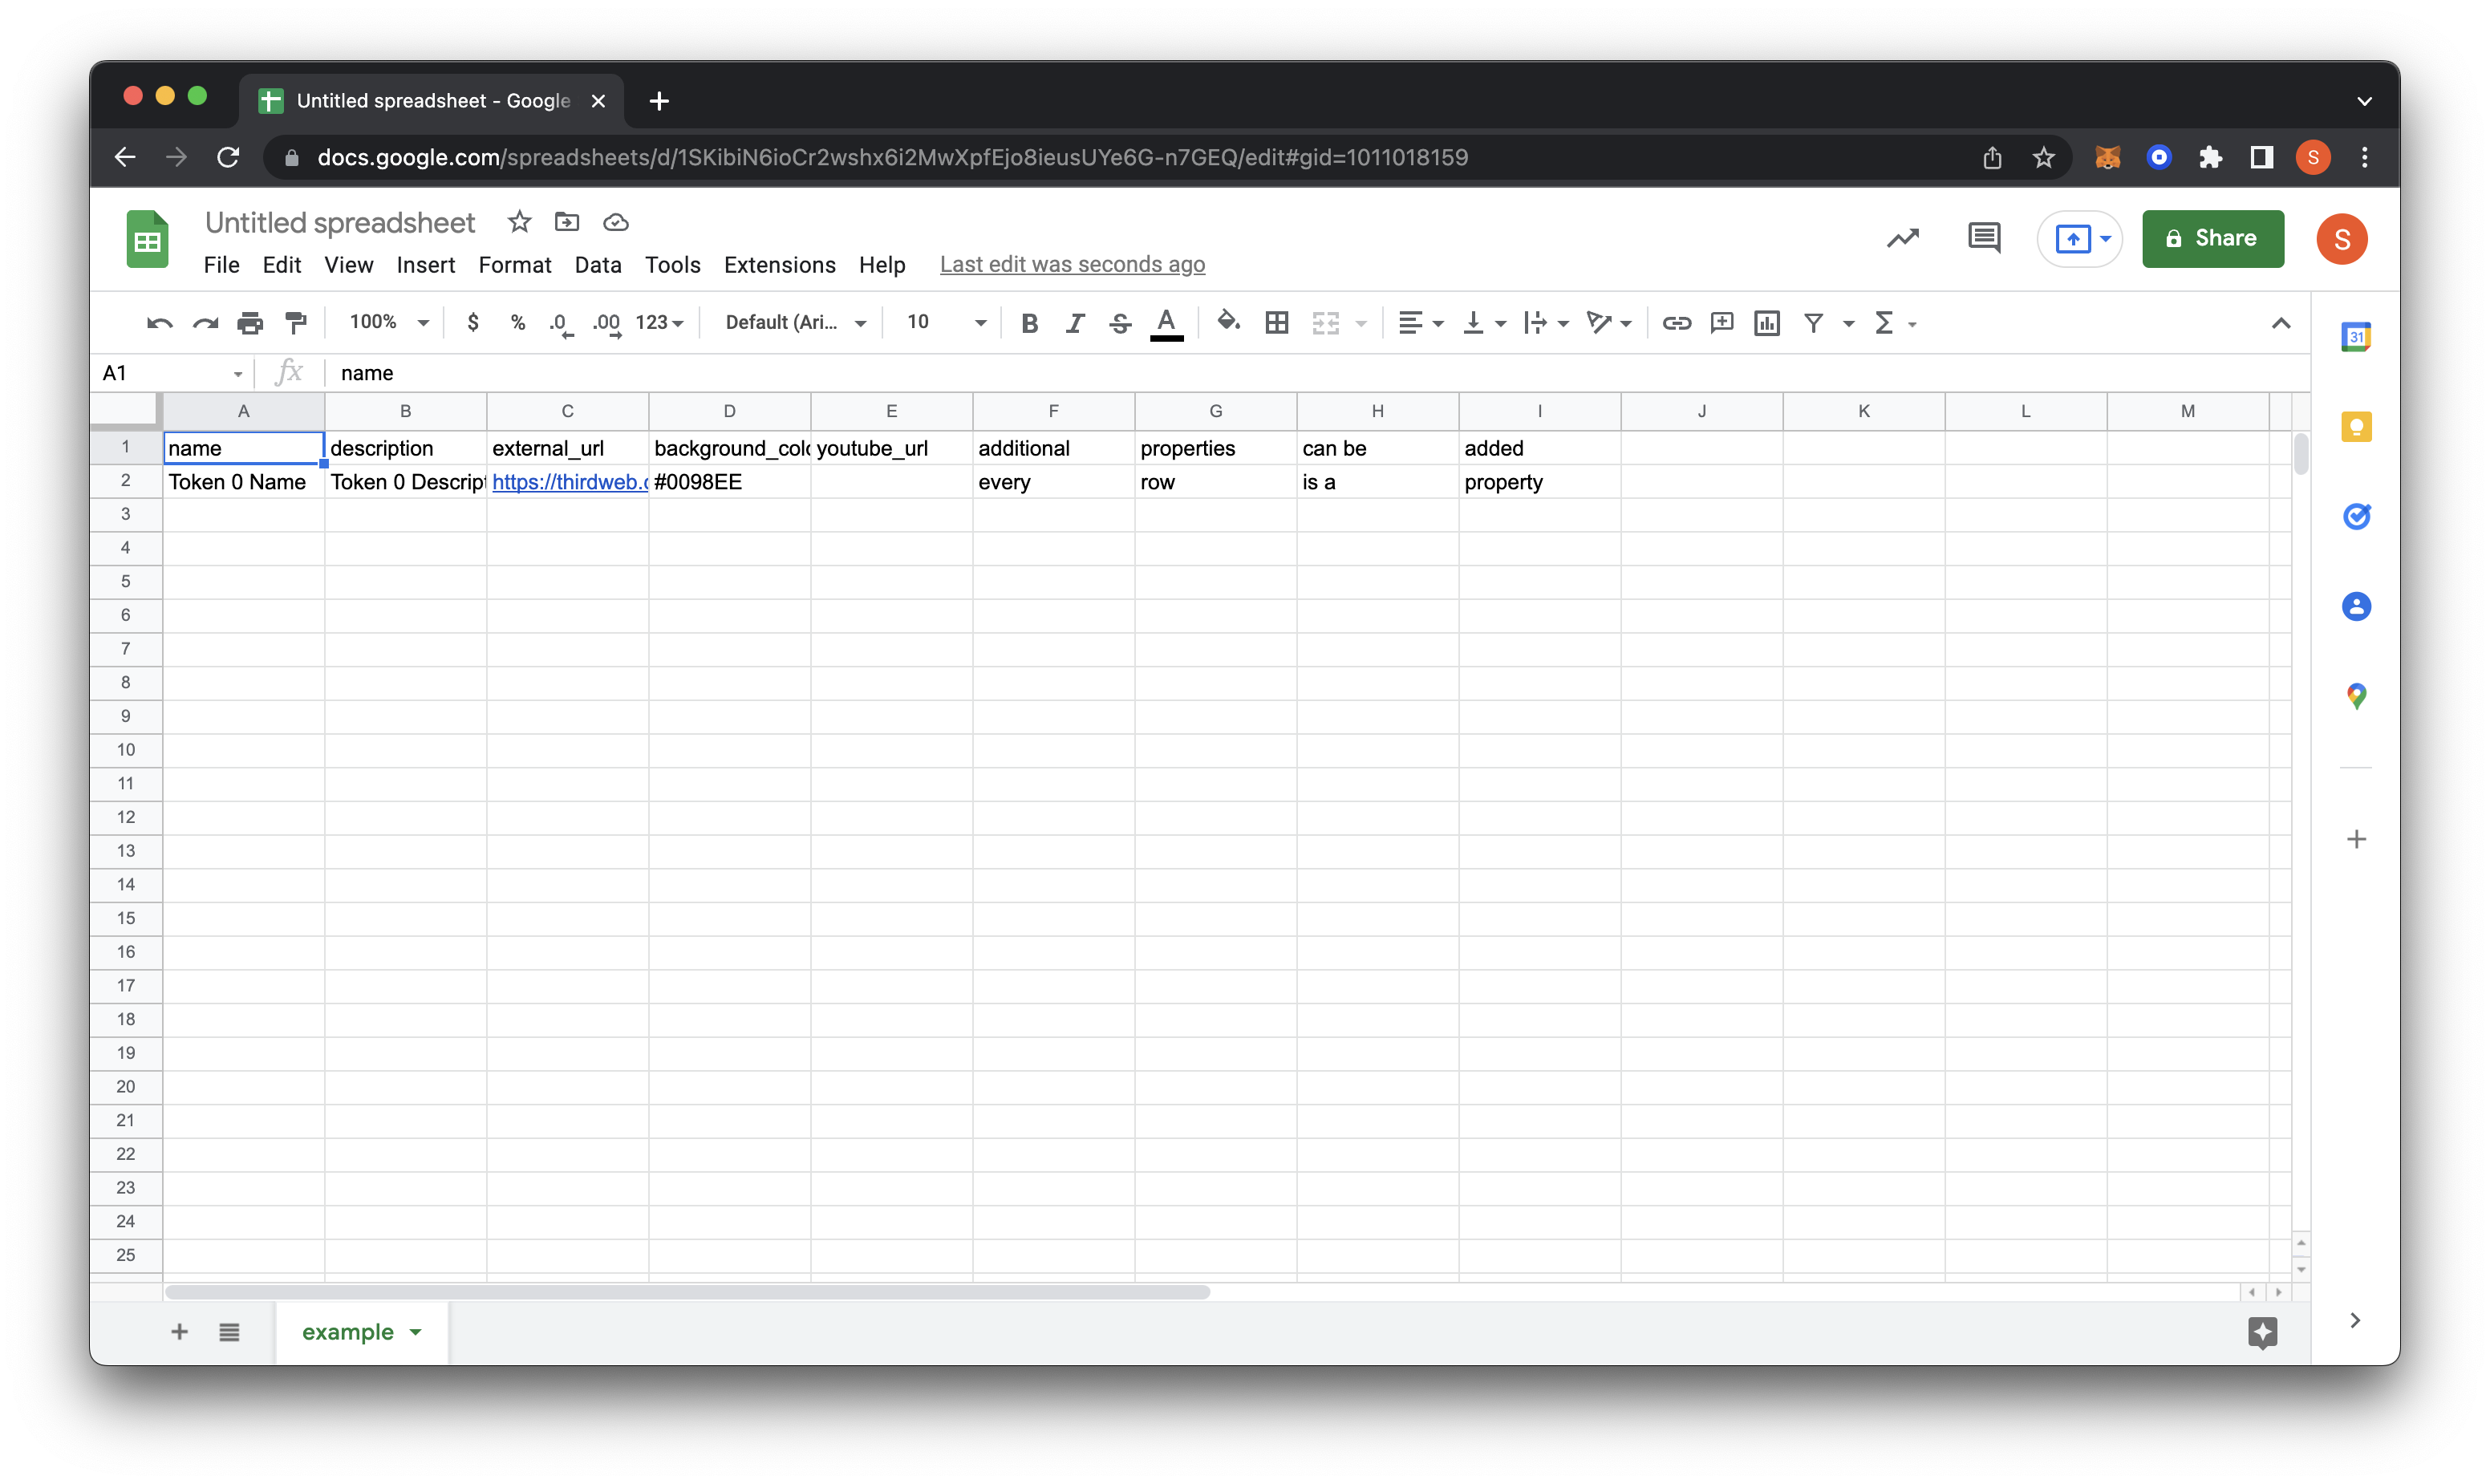 Sample CSV file from download opened in Google Sheets